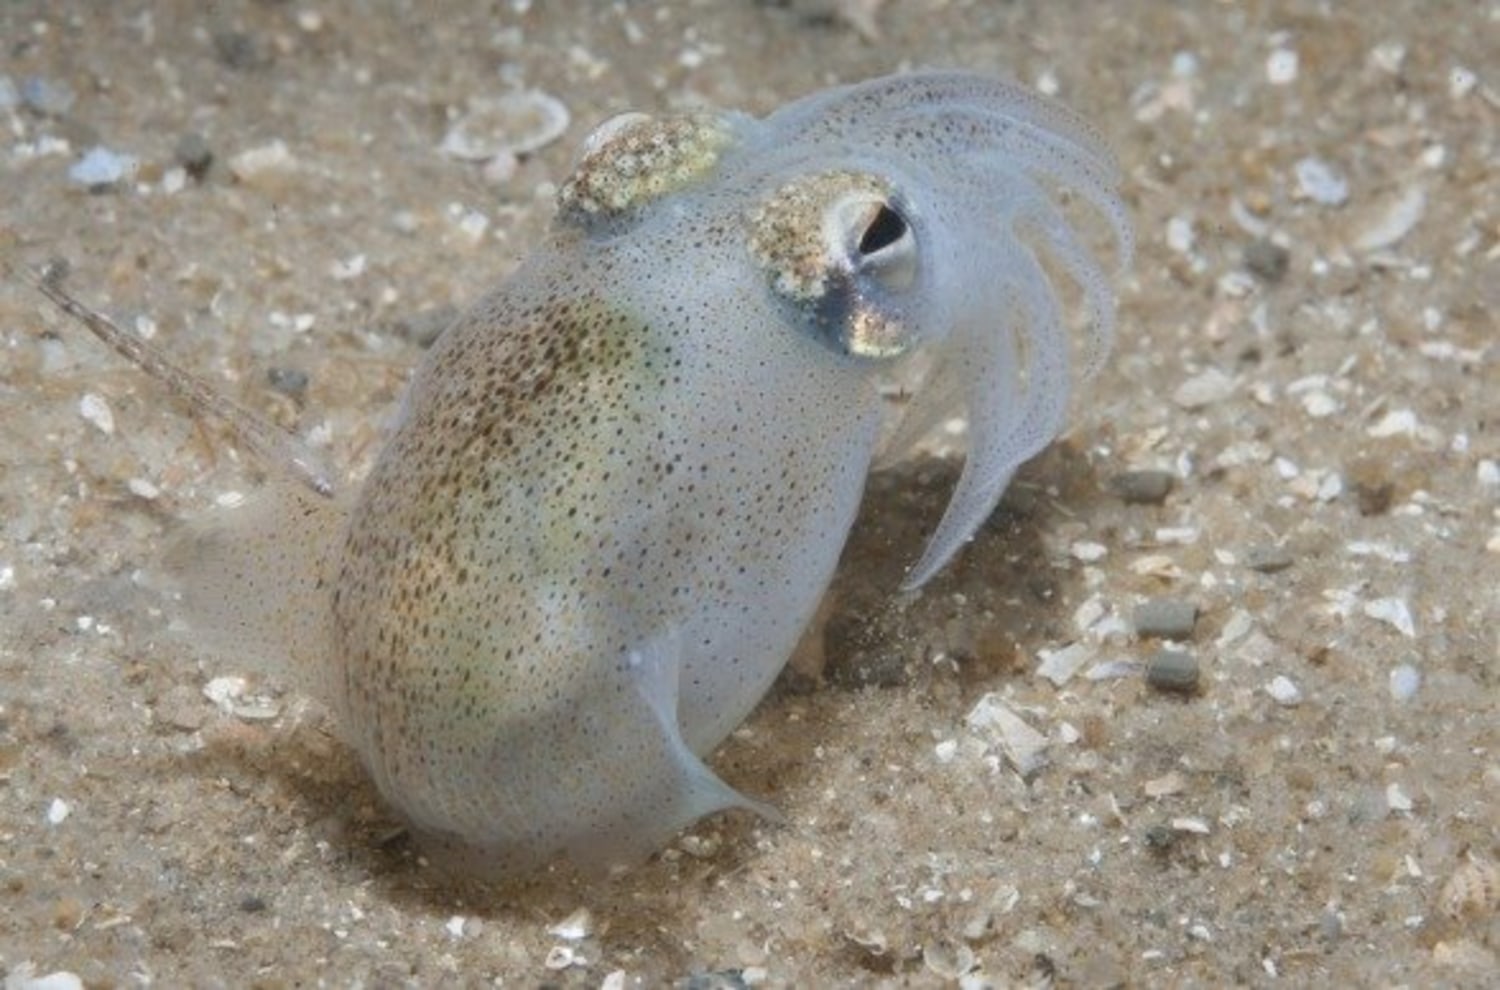 Sperm as superfood? Its a healthy snack for squid and other critters image picture